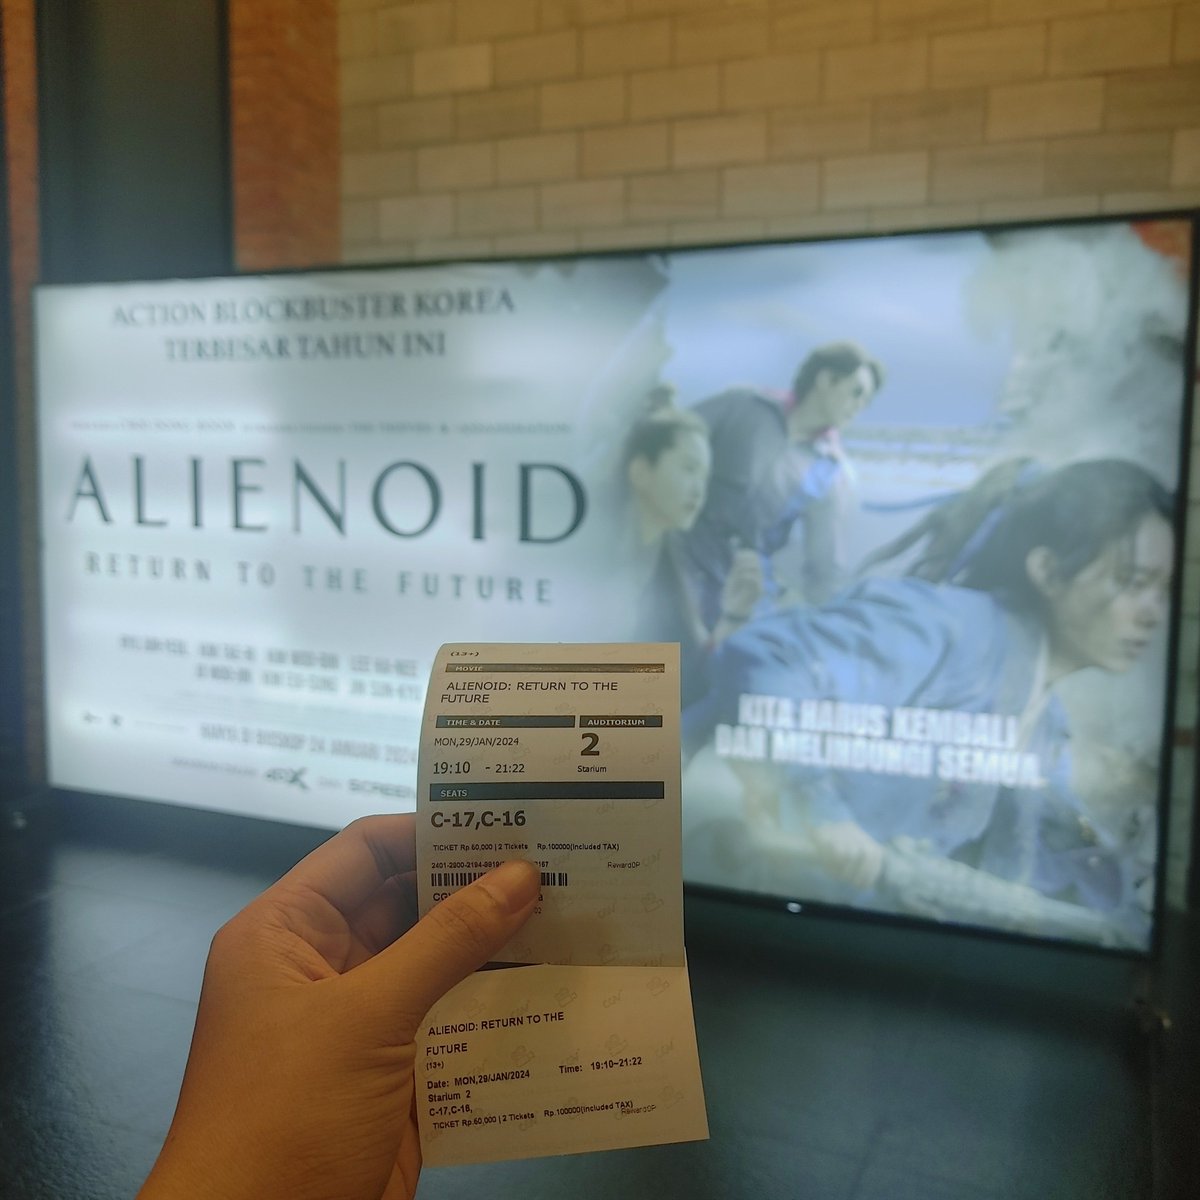 IM HERE ONLY TO SUPPORT MY BELOVED MOM. YUM JUNG AH. 
#염정아 
#YumJungAh
#외계인_2부 
#AlienoidPart2